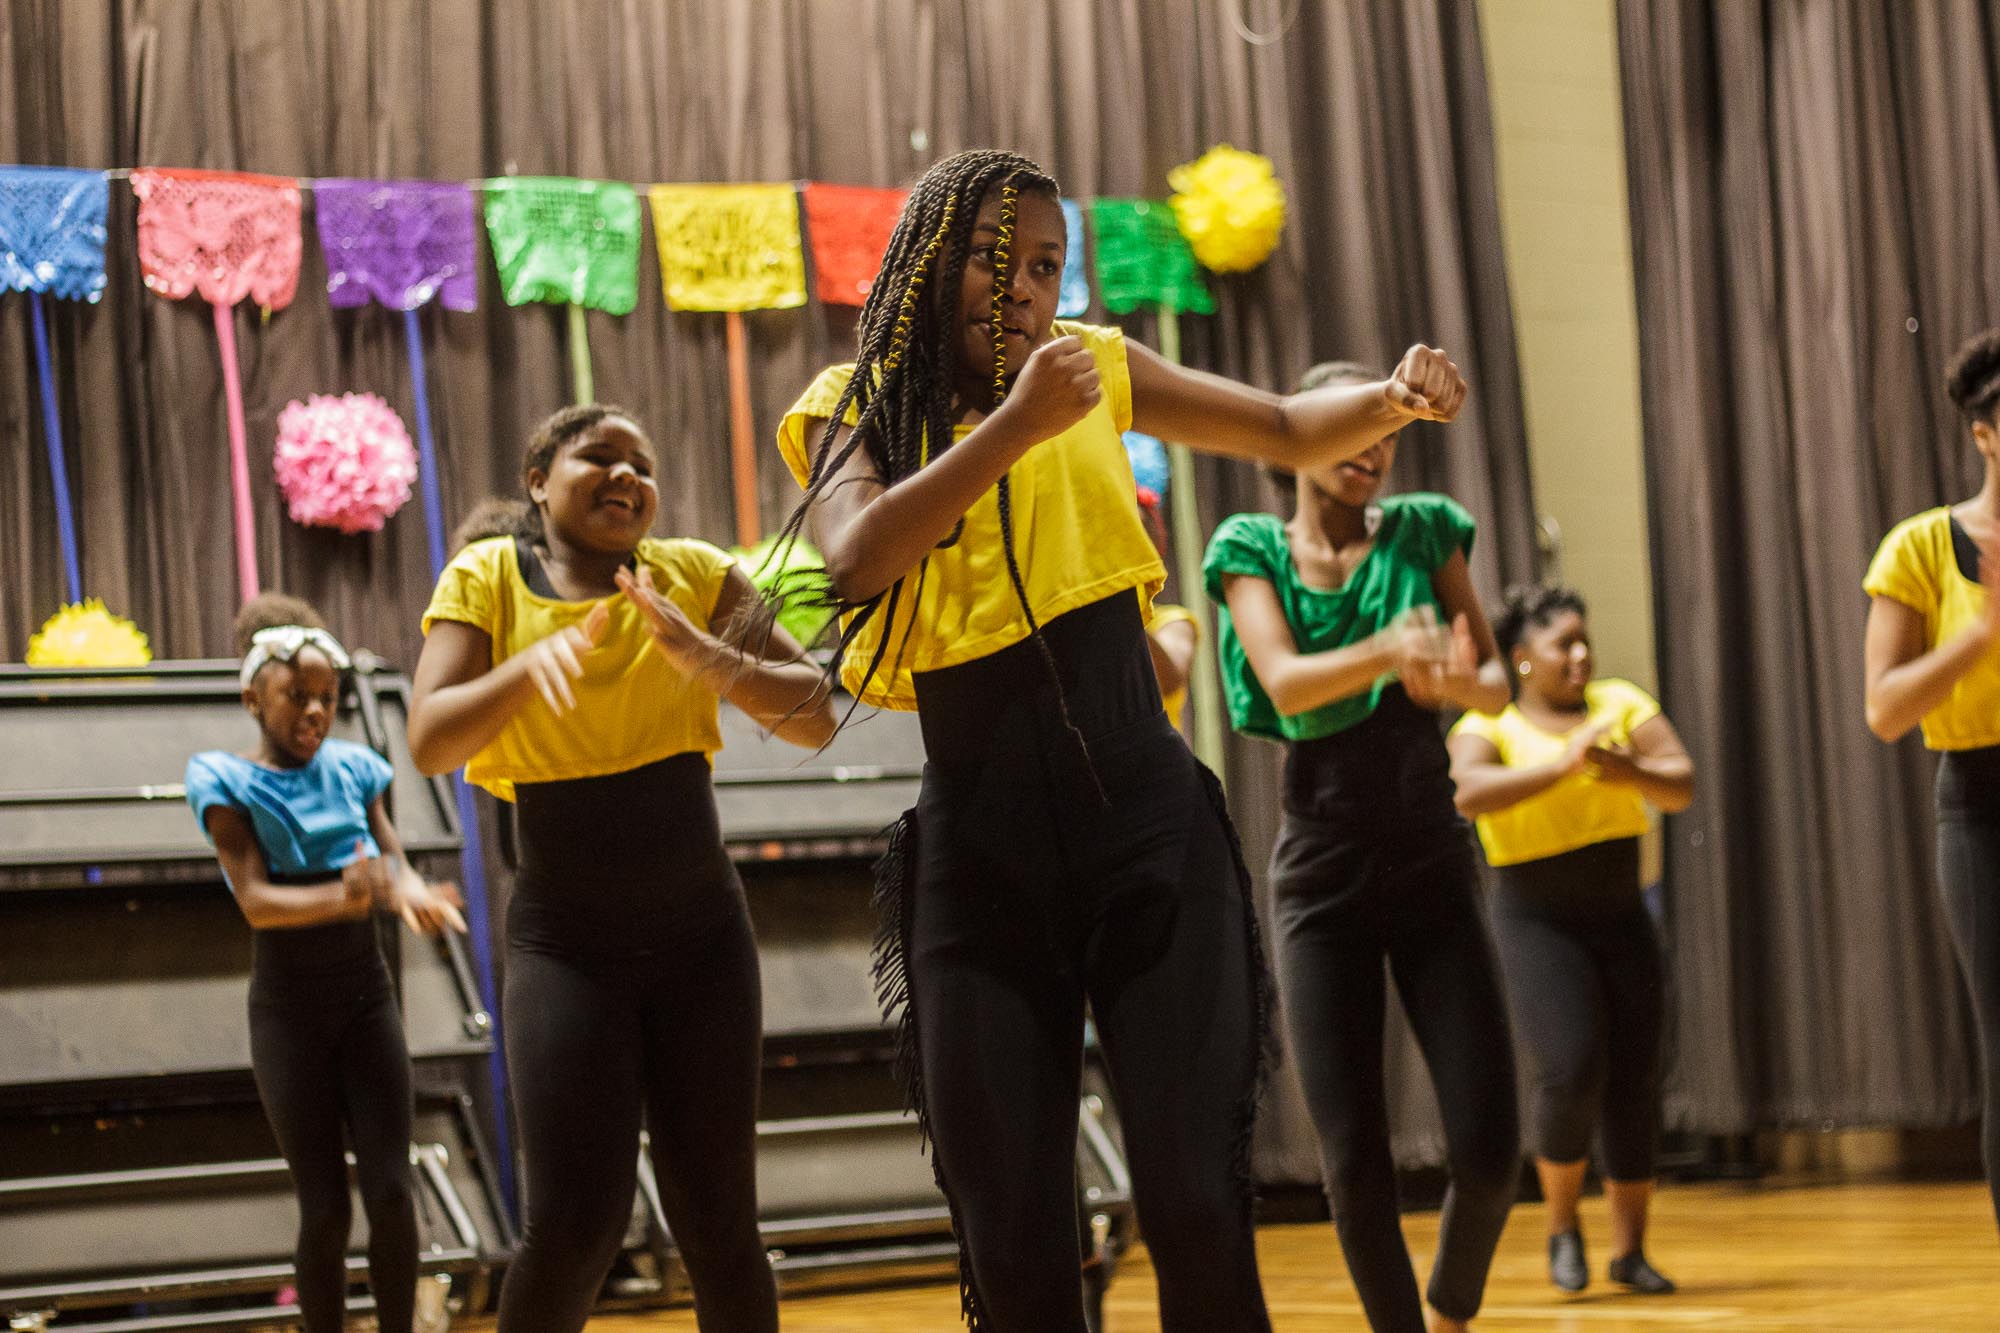 Members of the Colonia Middle School’s dance ensemble put on a pop-up performance of Latin American dance for students and guests. (Renier Otto)